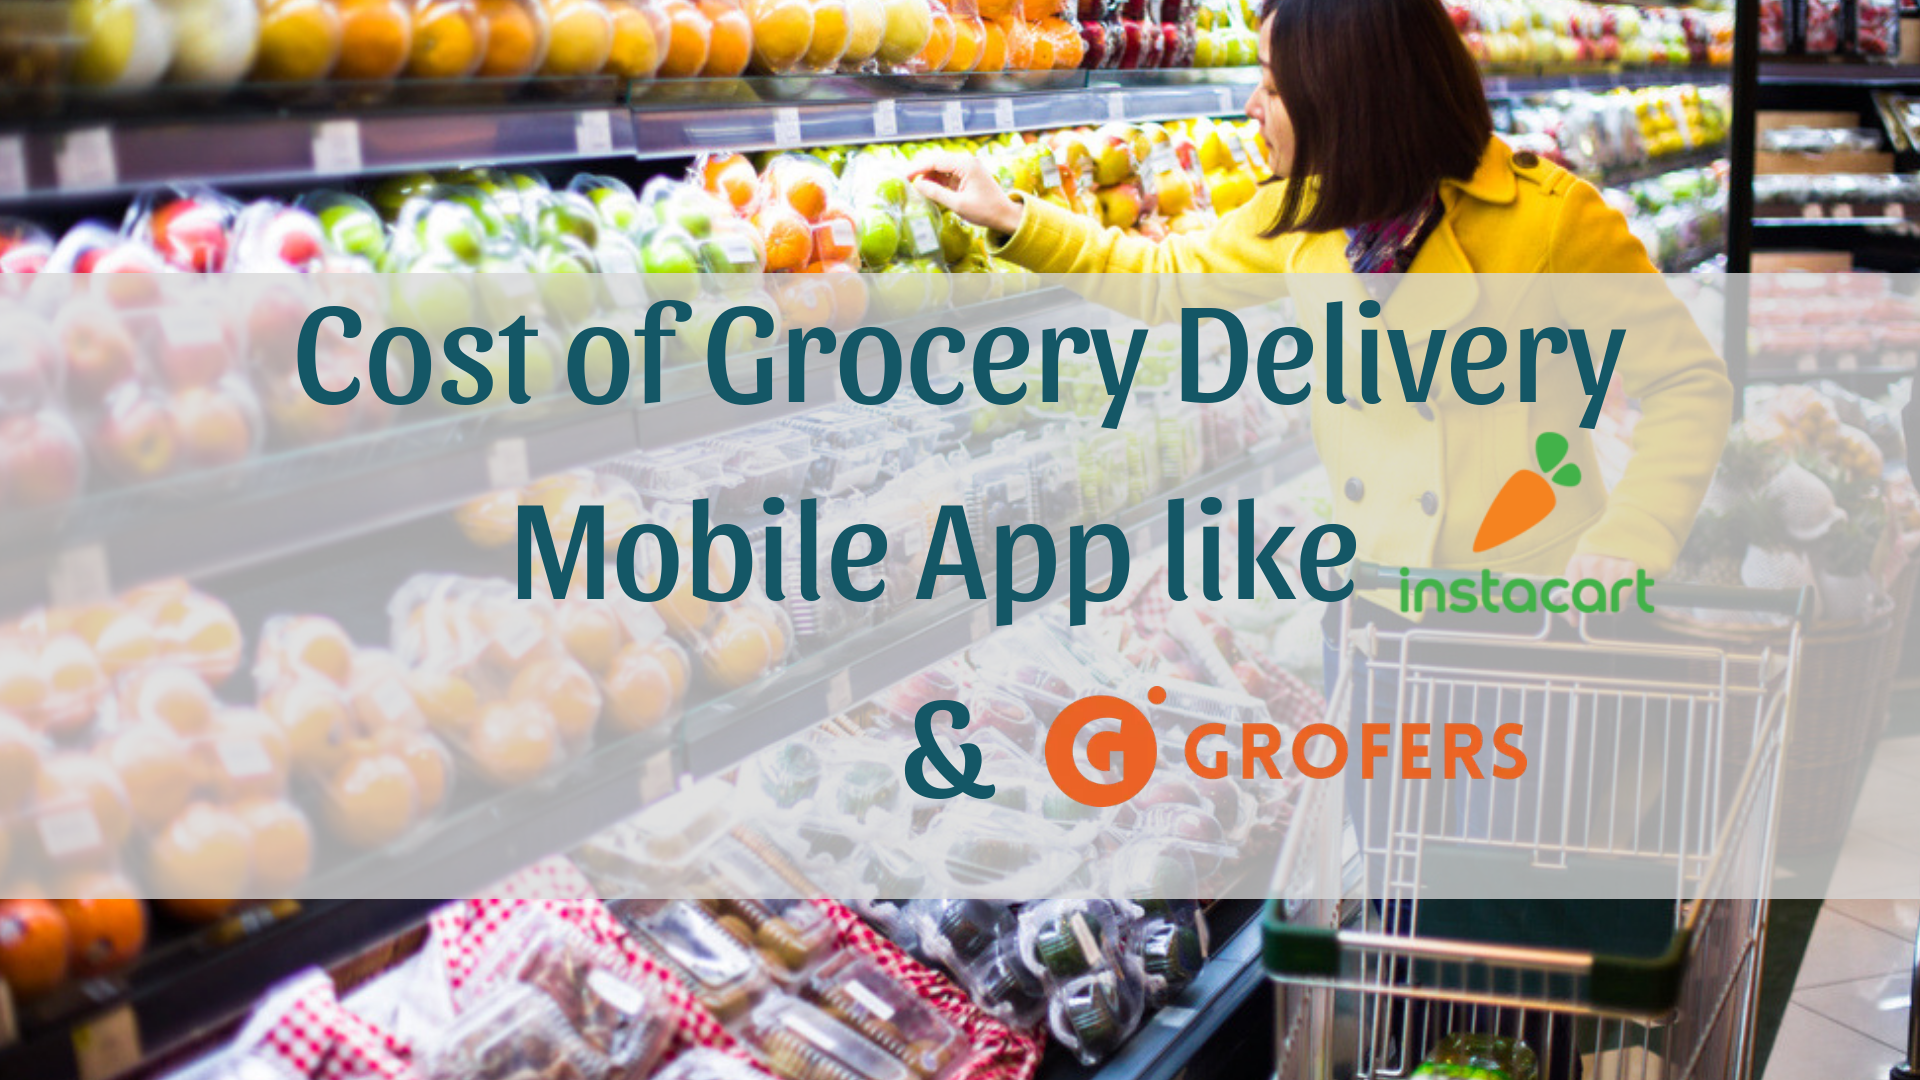 Top Features and Cost of Grocery Delivery Mobile App like Instacart & Grofers